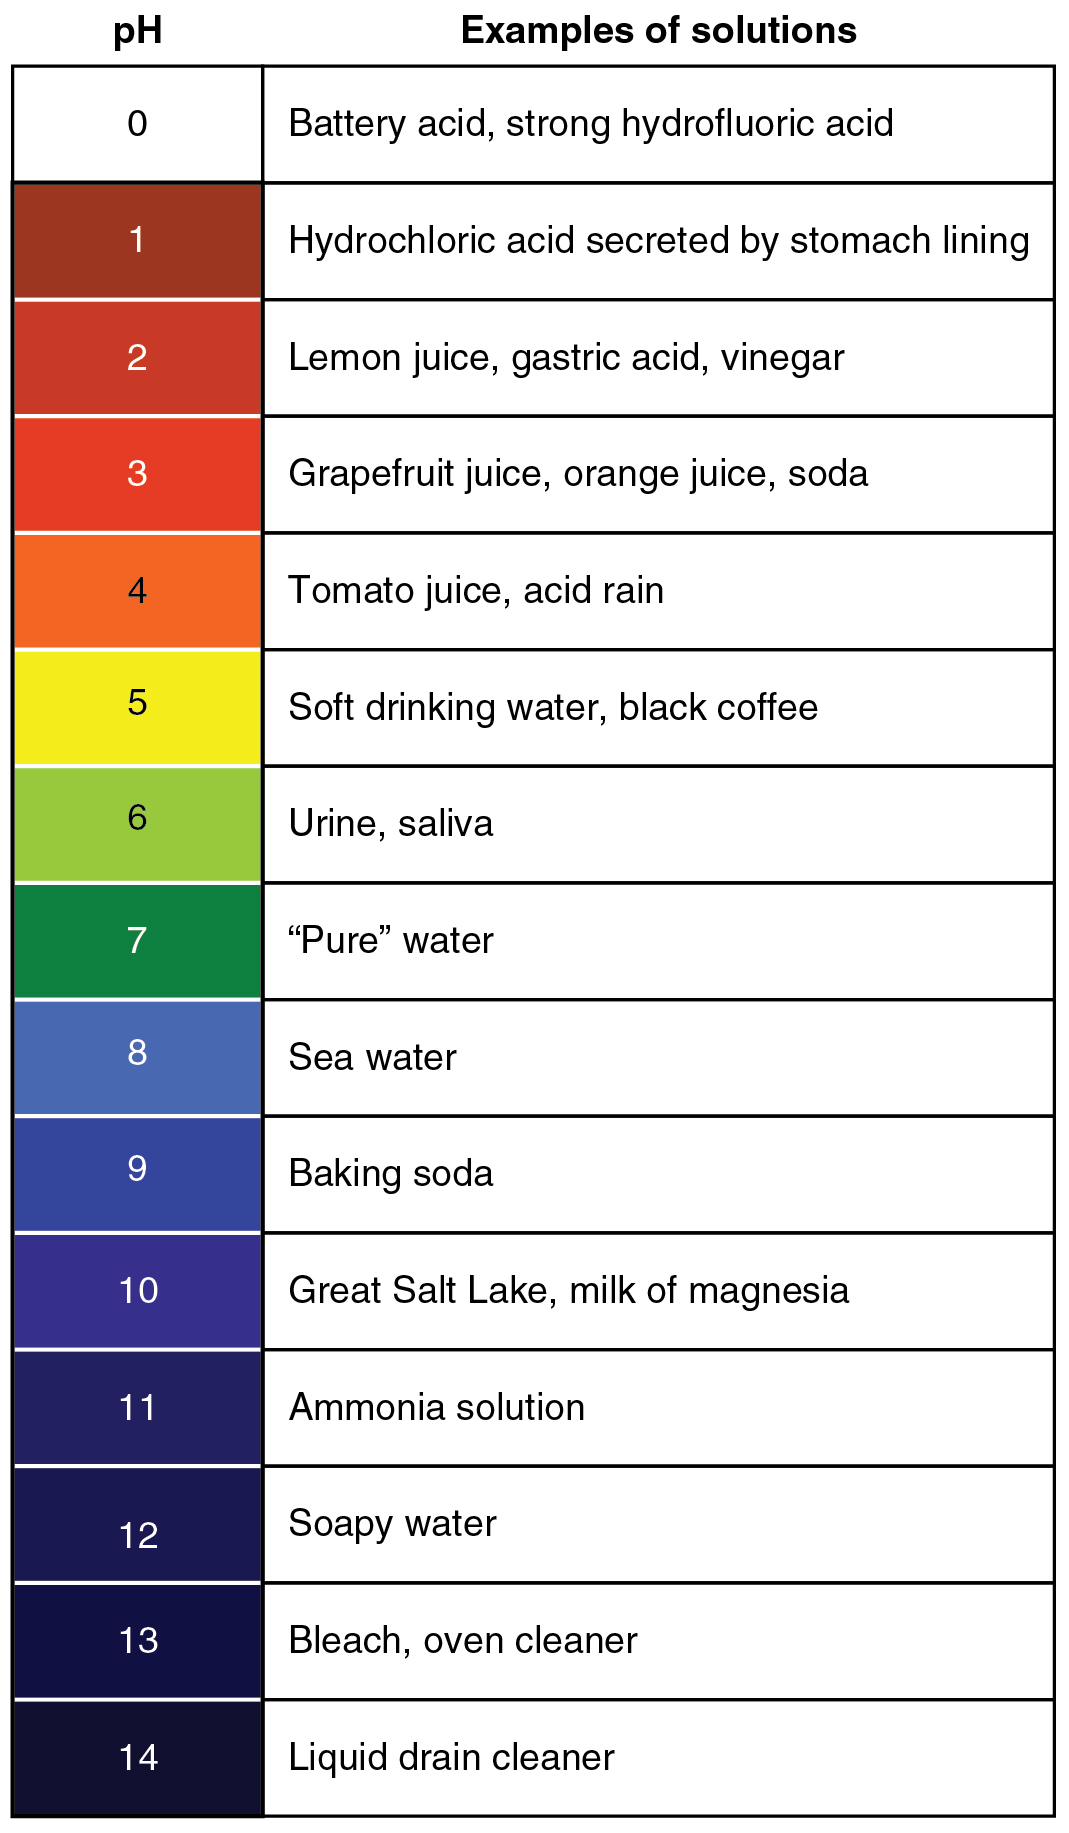 This table gives examples of solutions from PH of zero to 14. Examples of solutions with a PH of zero include battery acid and strong hydrofluoric acid. An example of a solution with a pH of one is the hydrochloric acid secreted by the stomach lining. Examples of solutions with a PH of two include lemon juice and vinegar. Examples of solutions with a PH of three include grapefruit juice, orange juice and soda. Examples of solutions with a PH of four include tomato juice and acid rain. Examples of solutions with a PH of five include soft drinking water and black coffee. Examples of solutions with a PH of six include urine and saliva. An example of a solution with a PH of seven is pure water. An example of a solution with a PH of eight is sea water. An example of a solution with a PH of nine is baking soda. Examples of solutions with a PH of ten include saline lake water and milk of magnesia. An example of a solution with a PH of eleven is an ammonia solution. An example of a solution with a PH of twelve is soapy water. Examples of solutions with a PH of thirteen include bleach and oven cleaner. An example of a solution with a PH of fourteen is liquid drain cleaner.